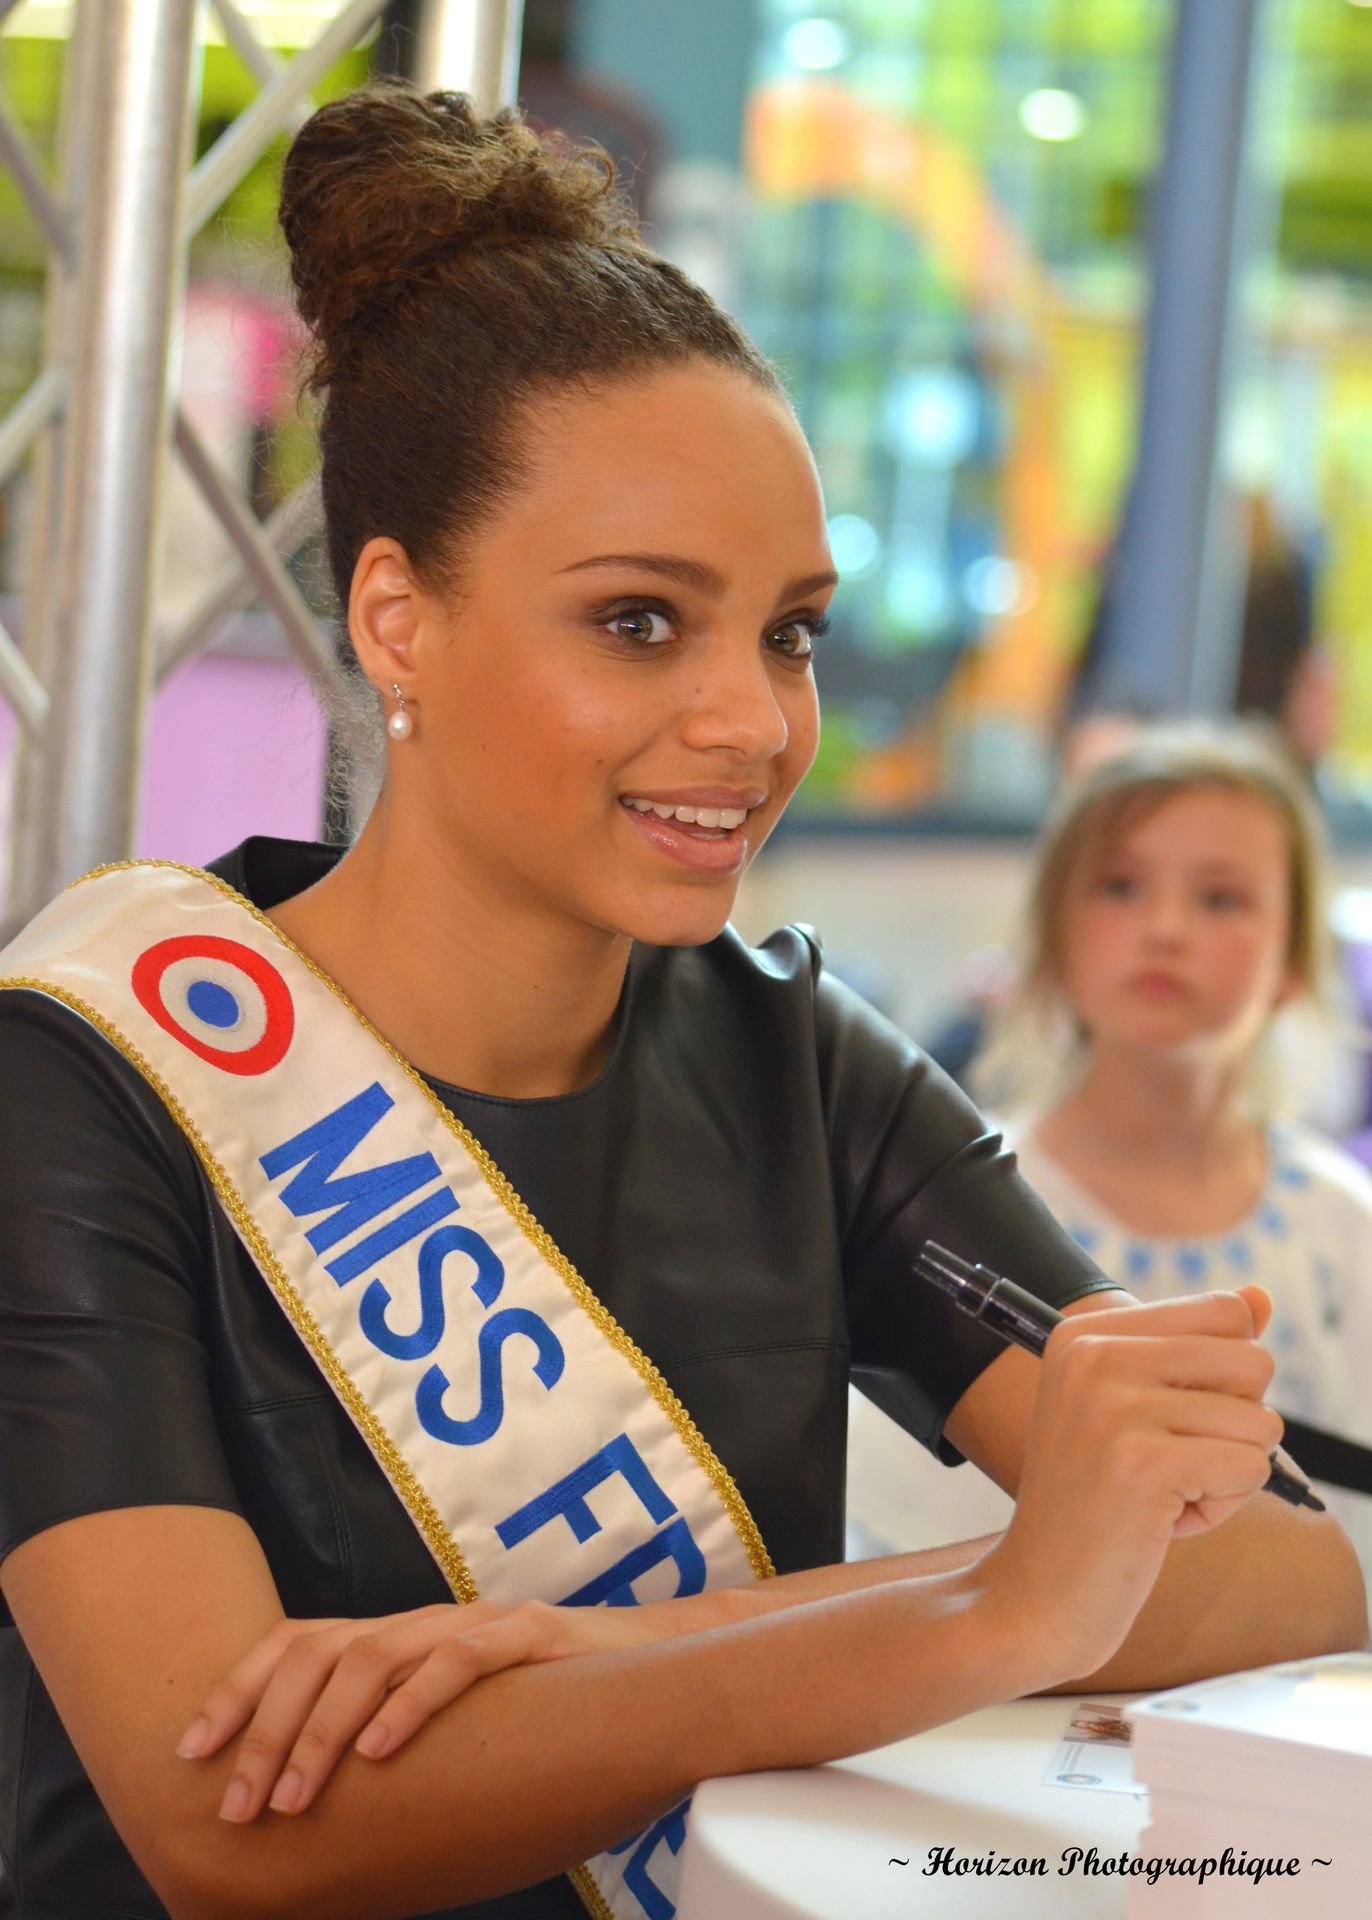 ALICIA AYLIES MISS FRANCE 2017